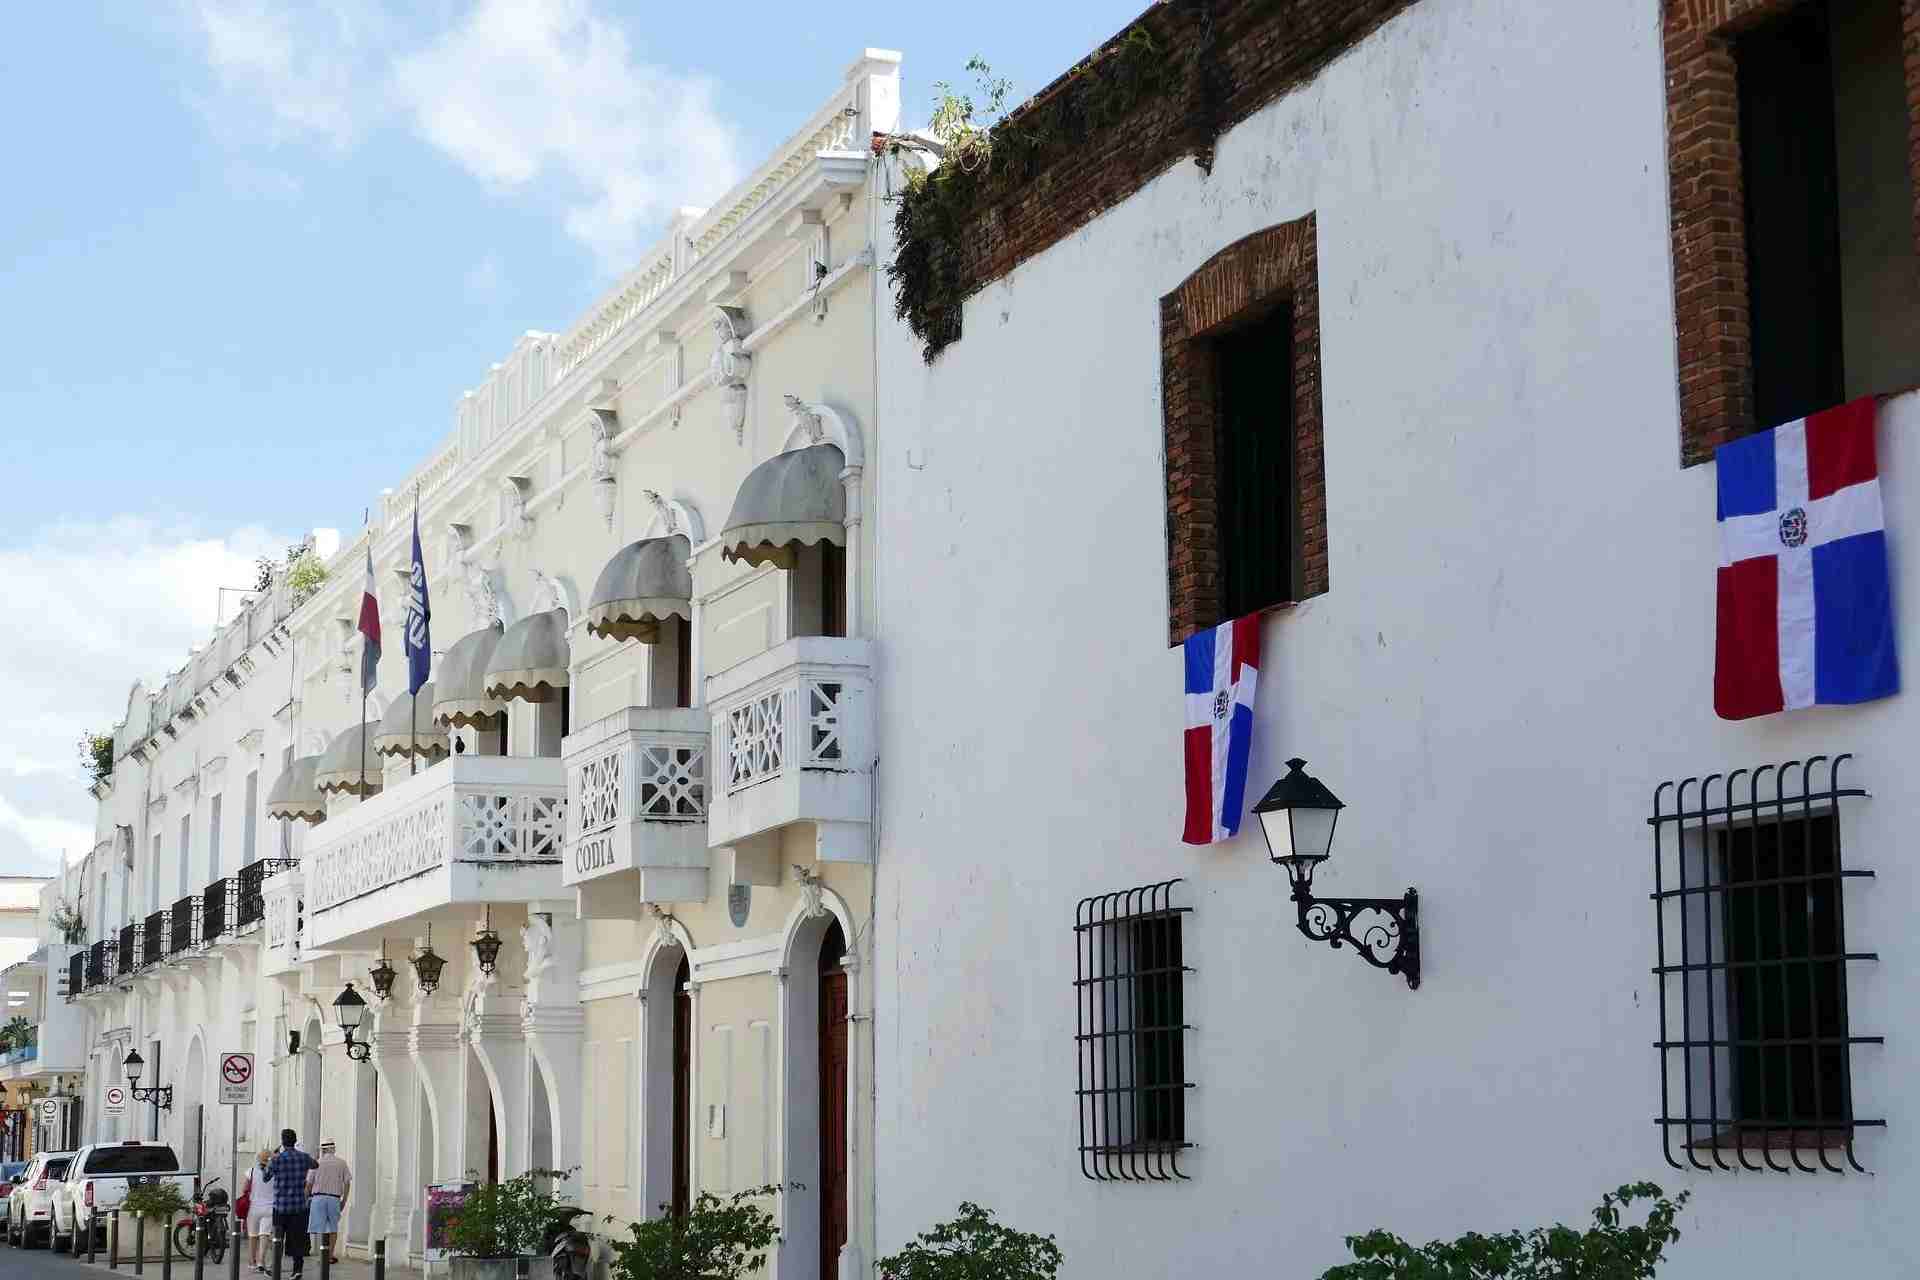 Dominican Republic has a literacy rate of over 93%.